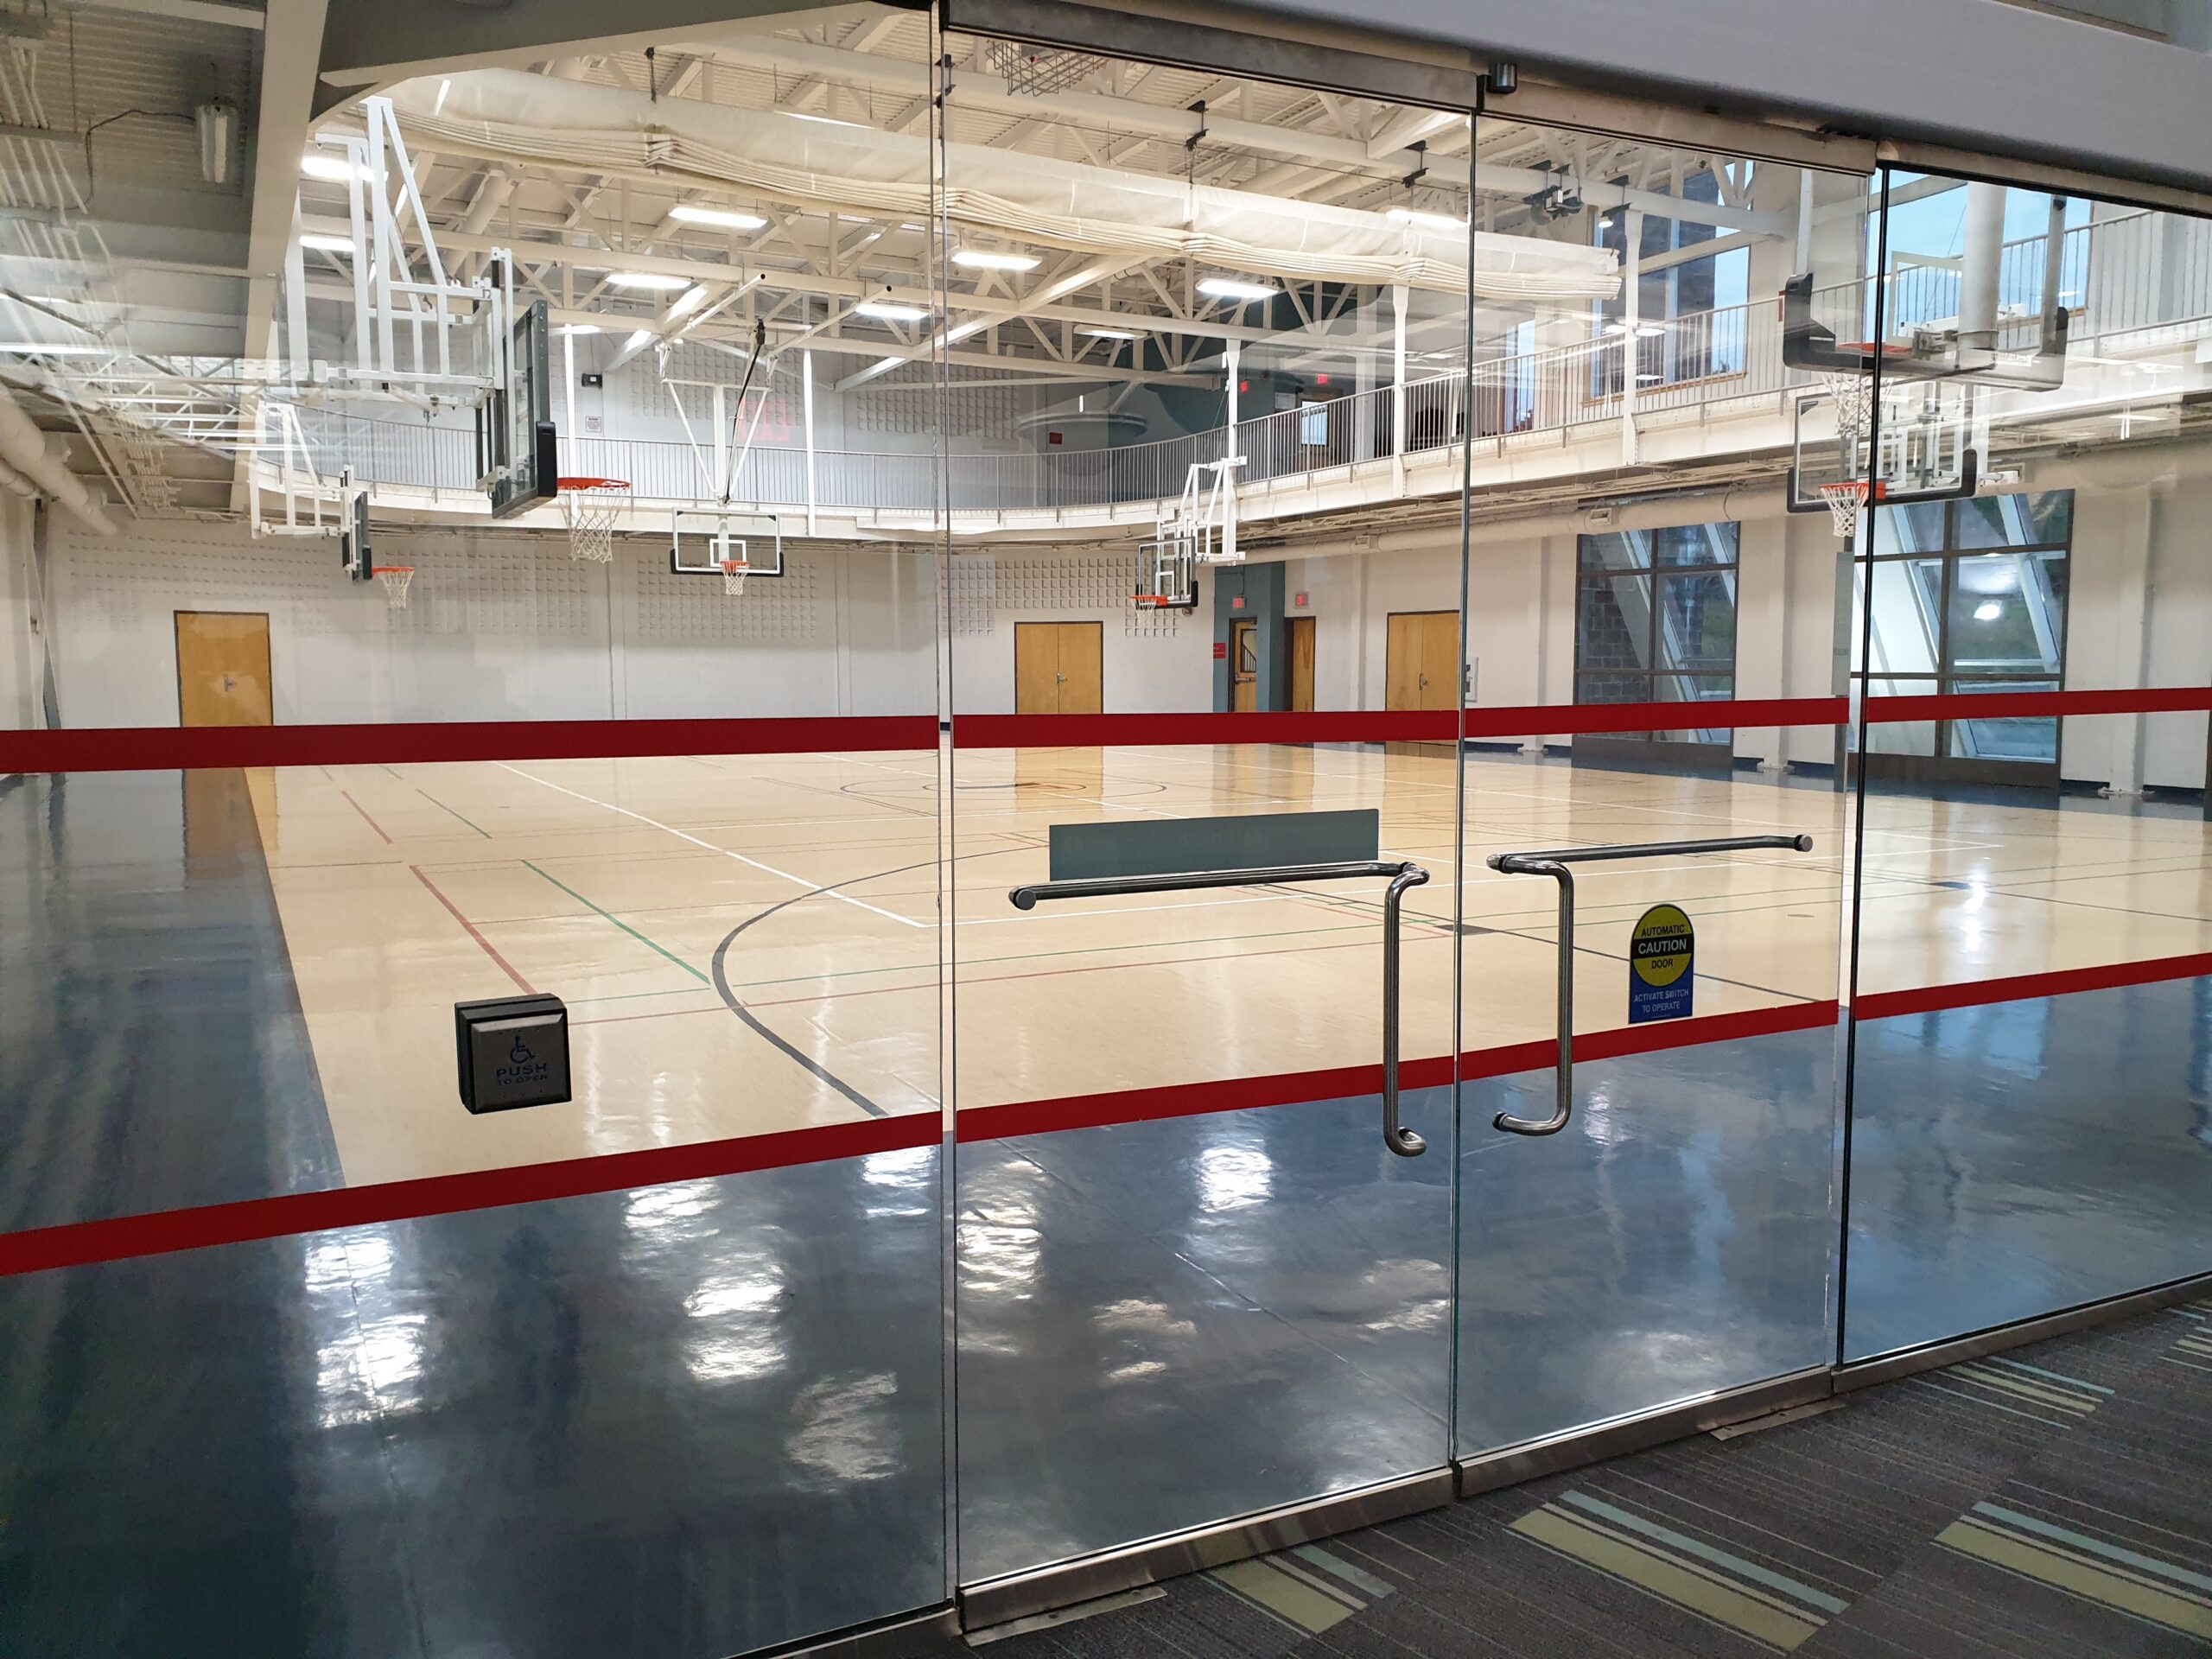 The exterior of a gymnasium with basketball nets below the walking track